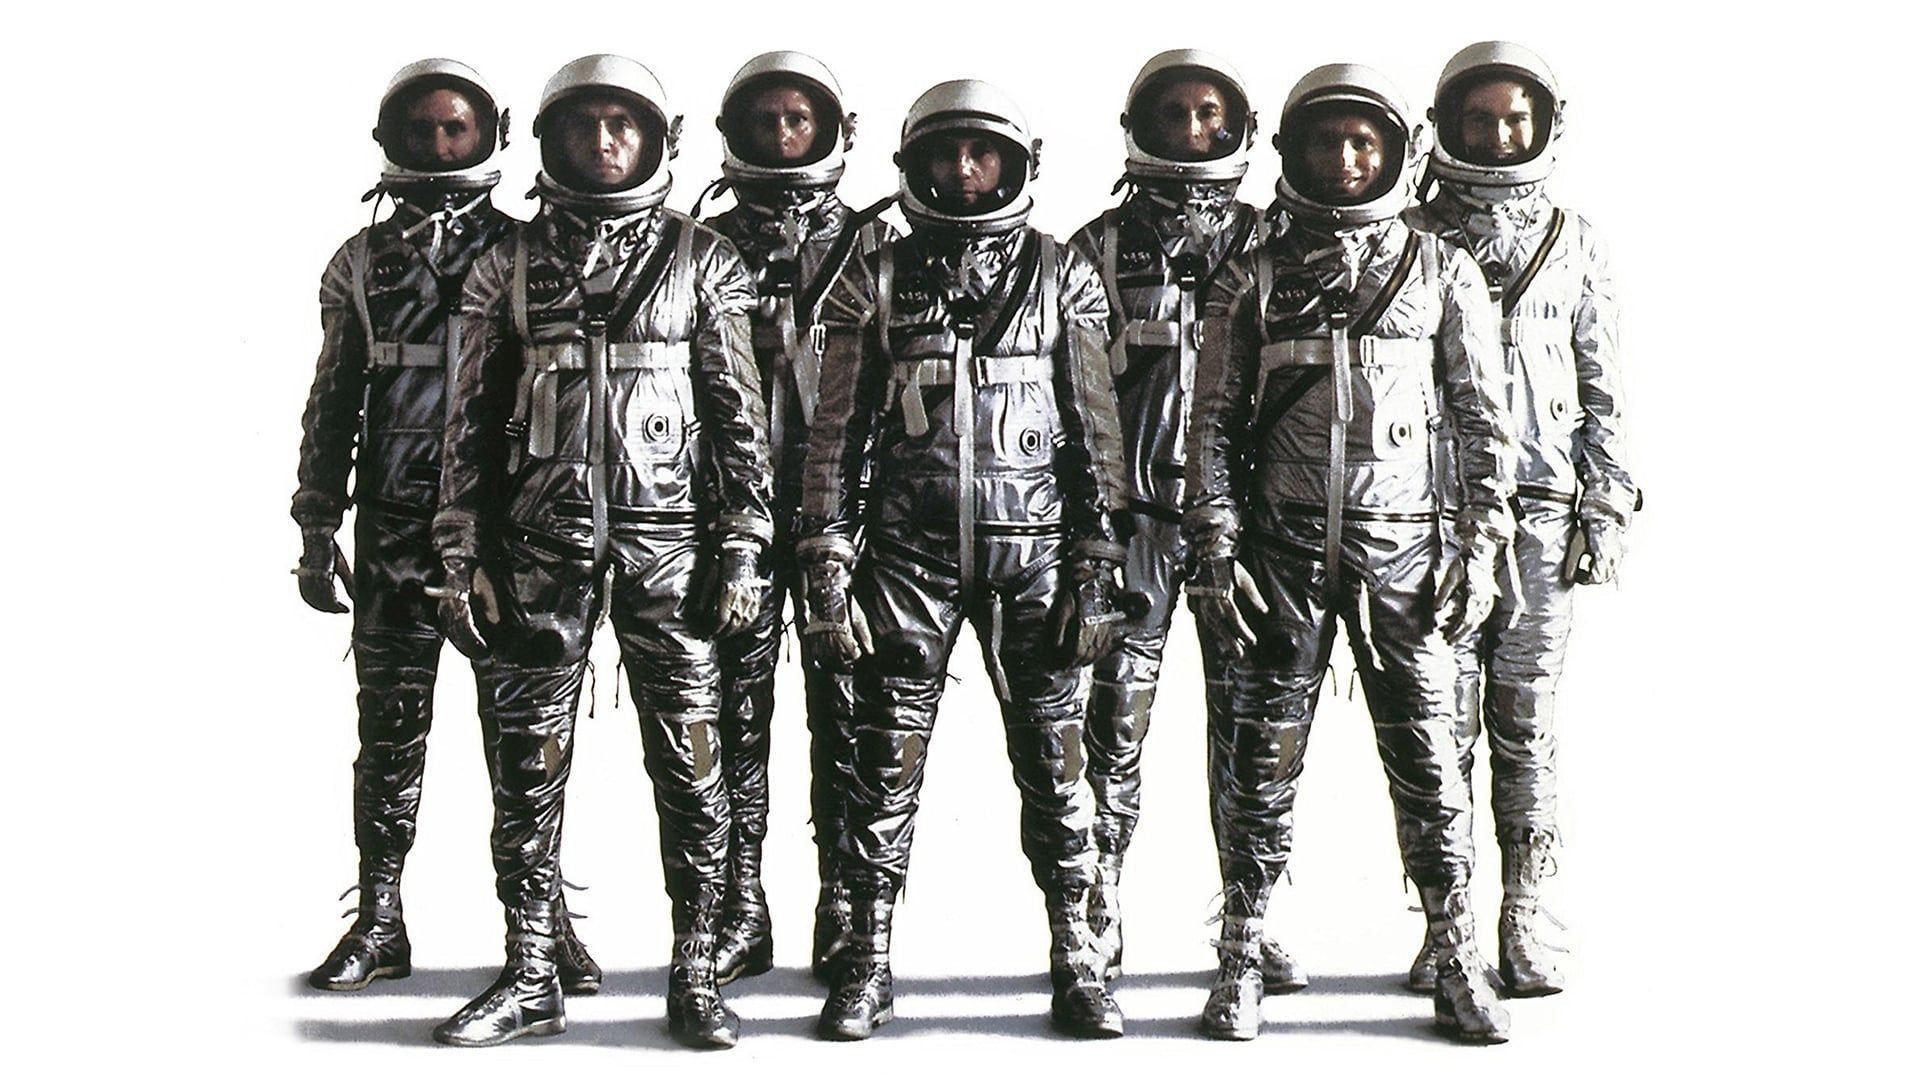 The Right Stuff Backdrop